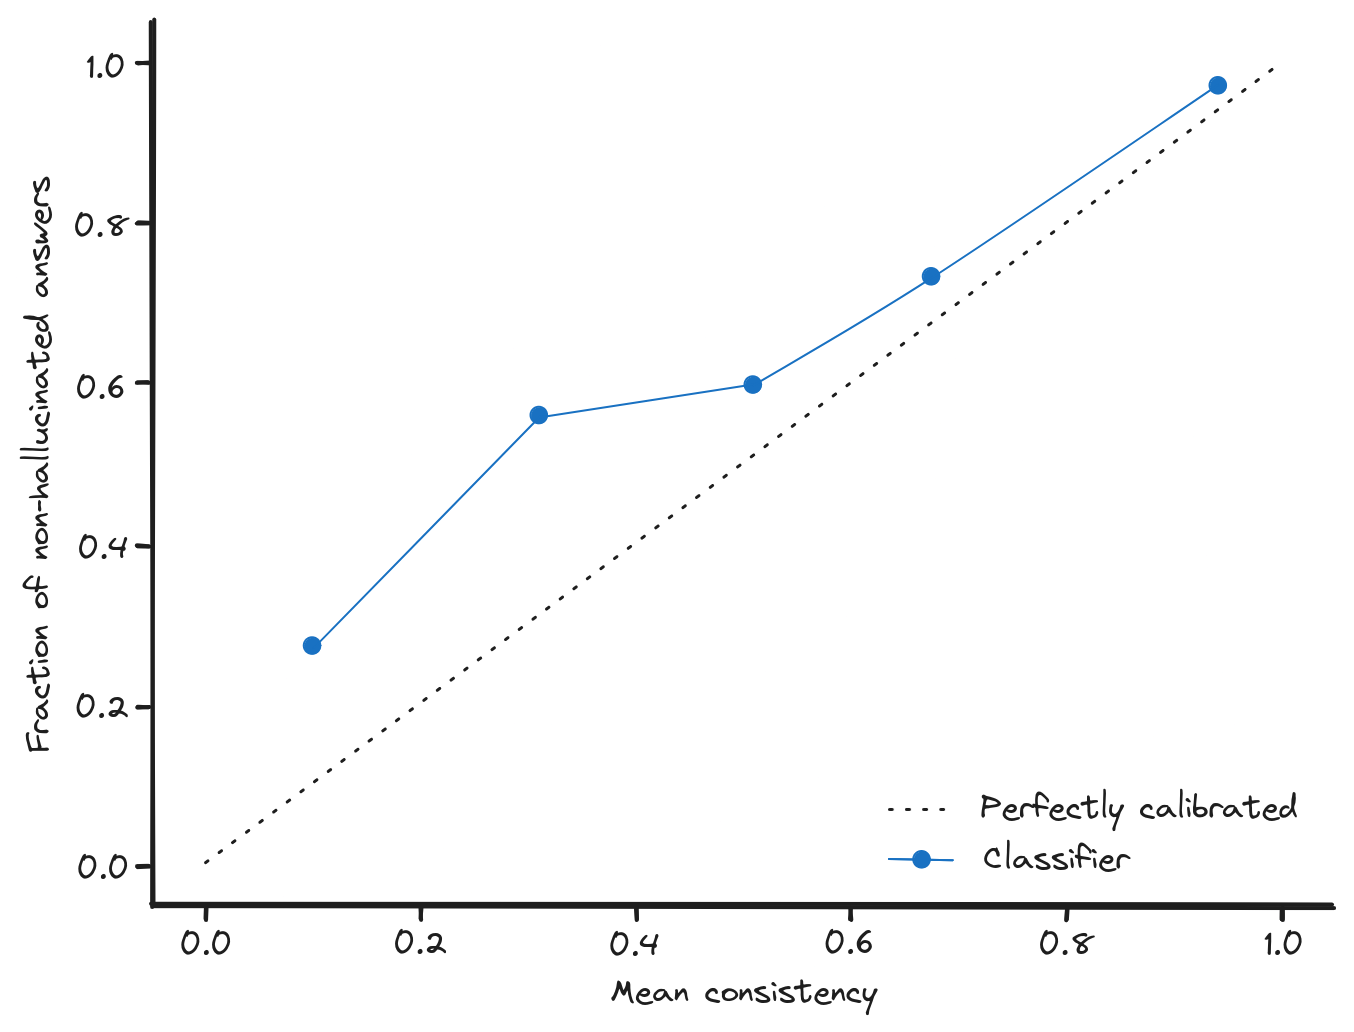 Calibration curve for consistency on hallucinations detection